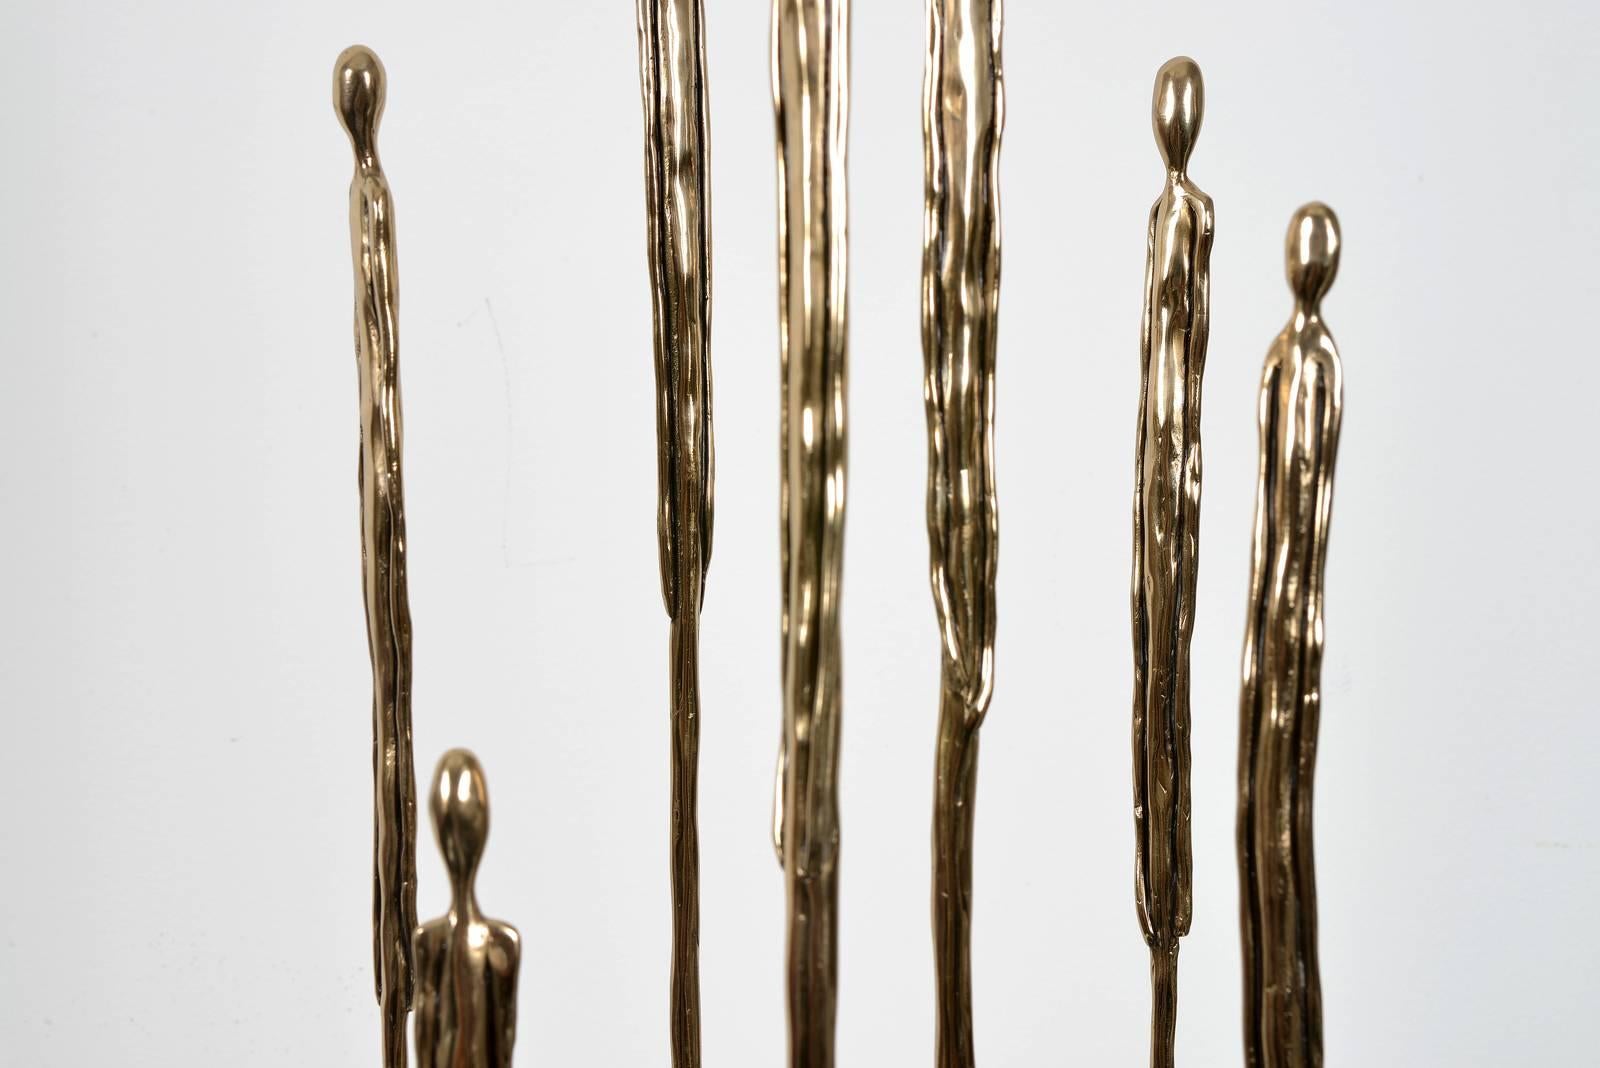 From our own Perspective - Contemporary Sculpture by Jennyfer Stratman